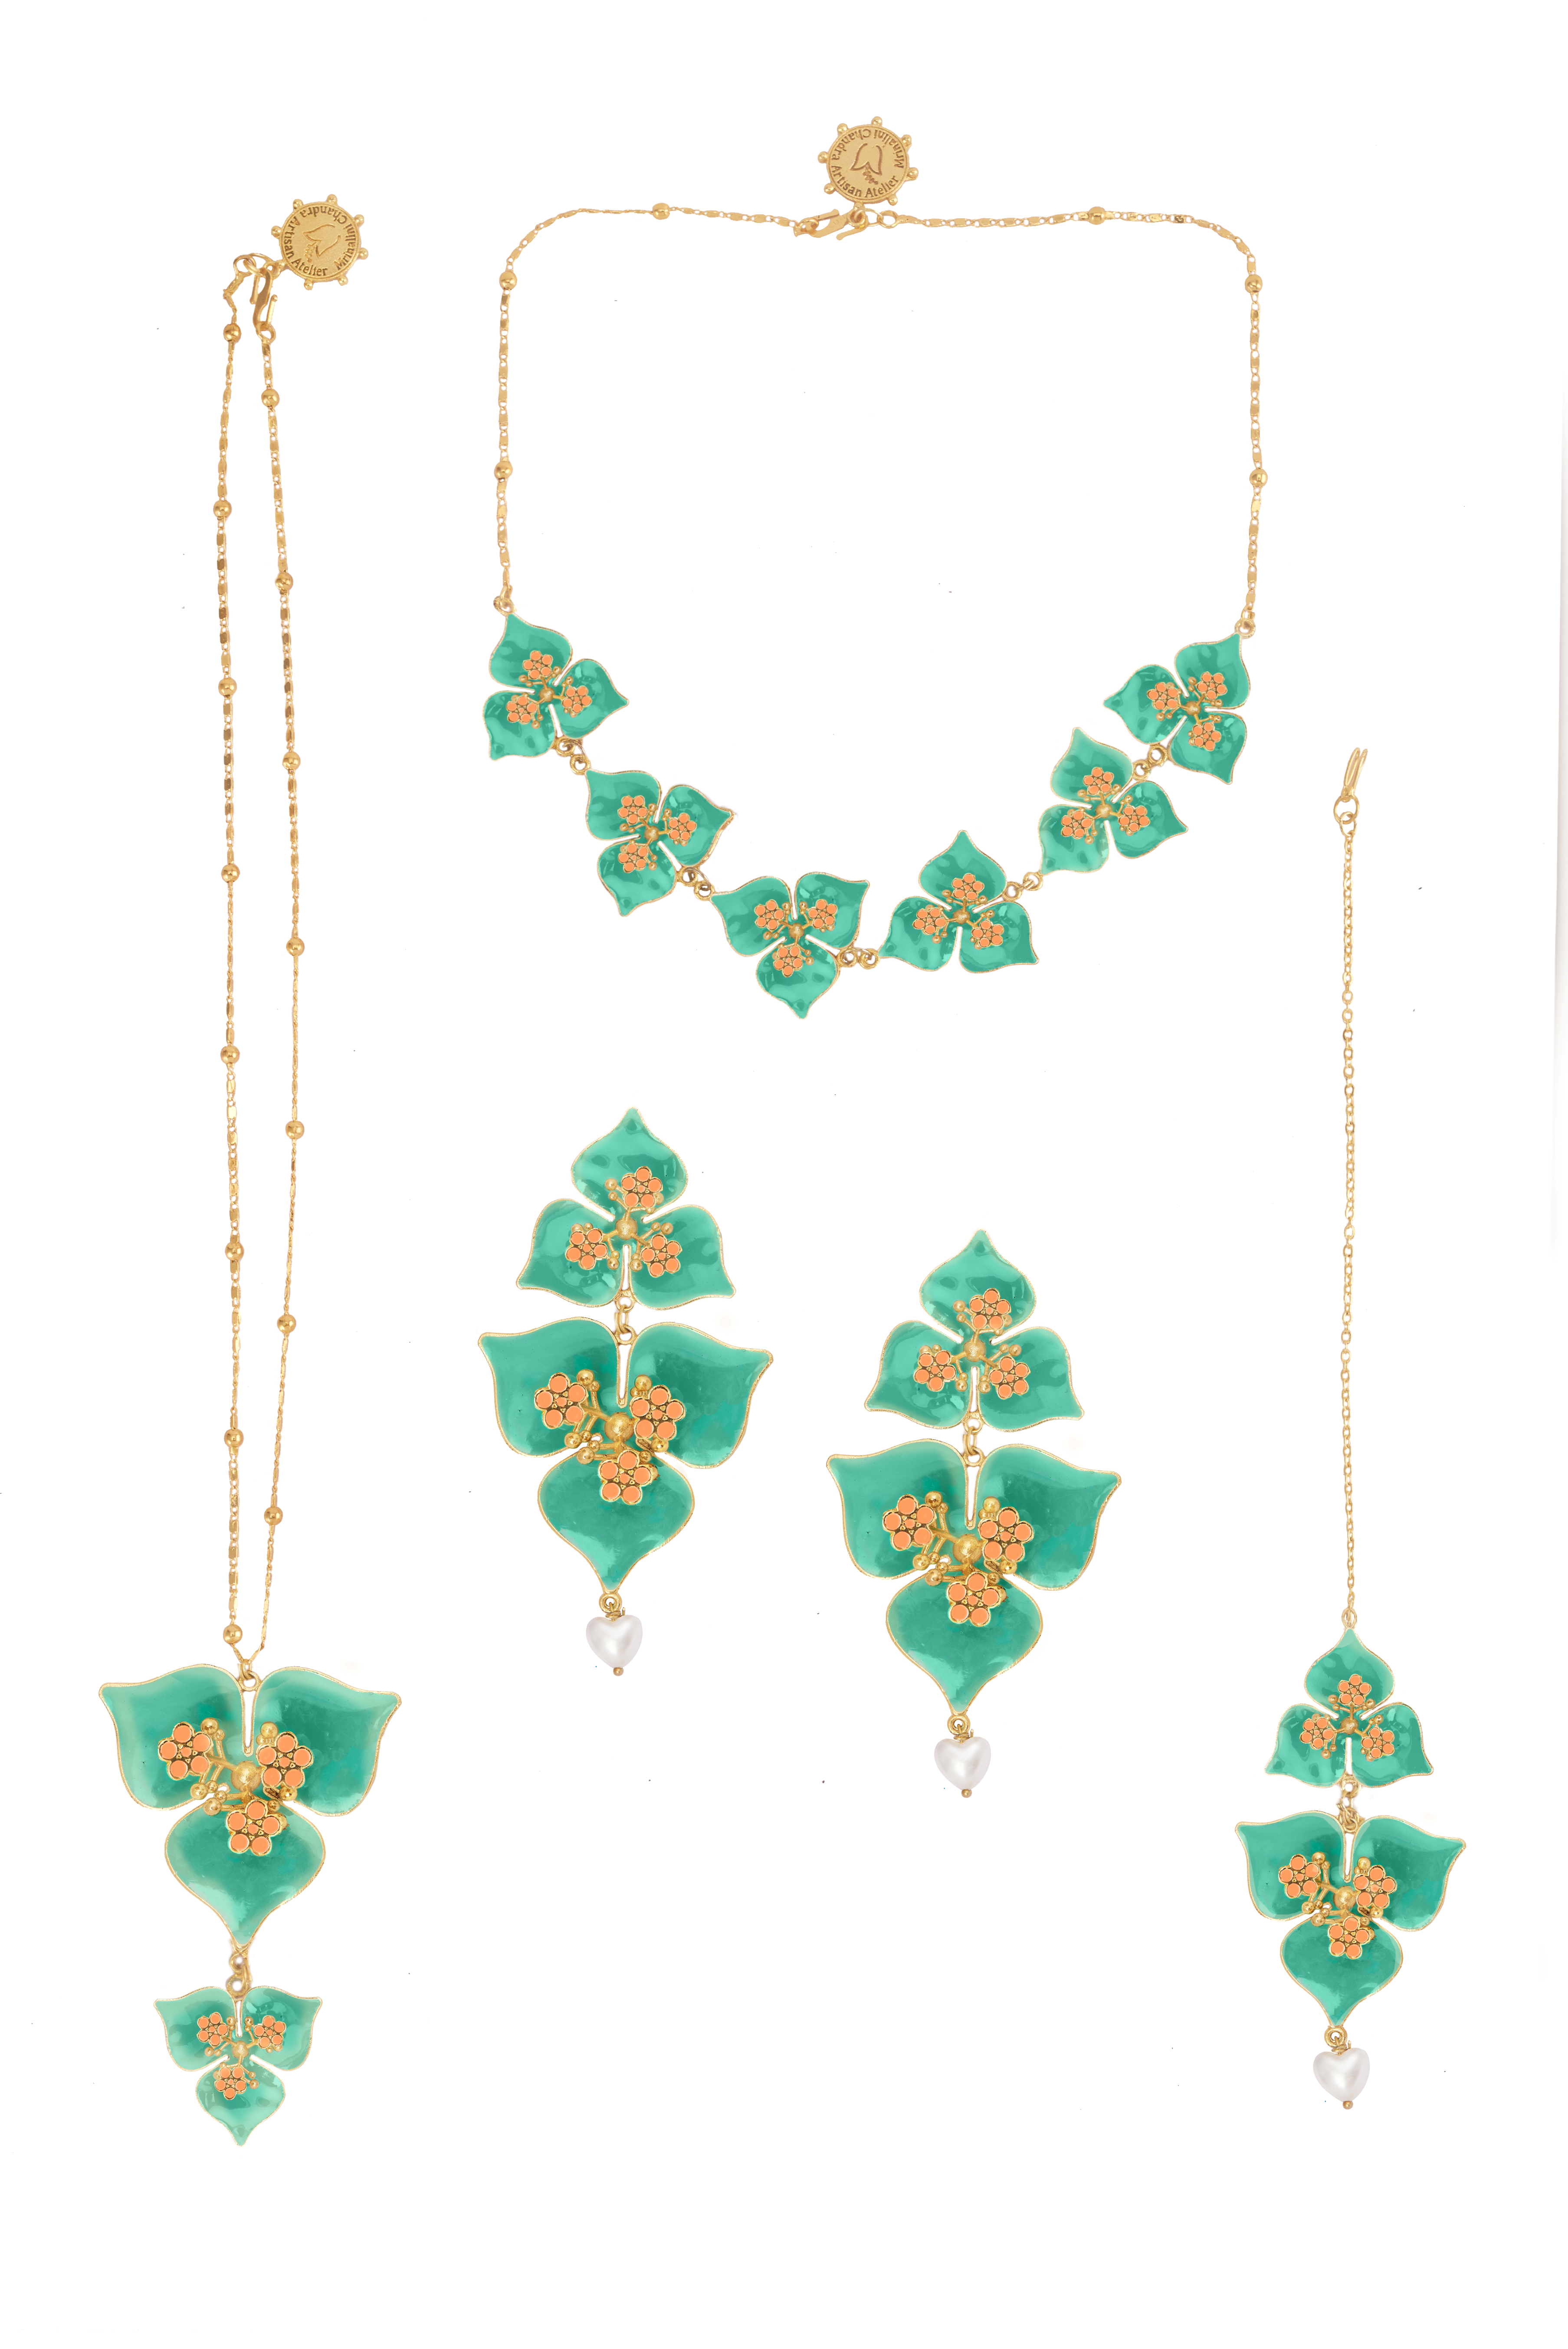 Native American Navajo Made Necklace and Earrings Set with Royston Turquoise  at Kachina House